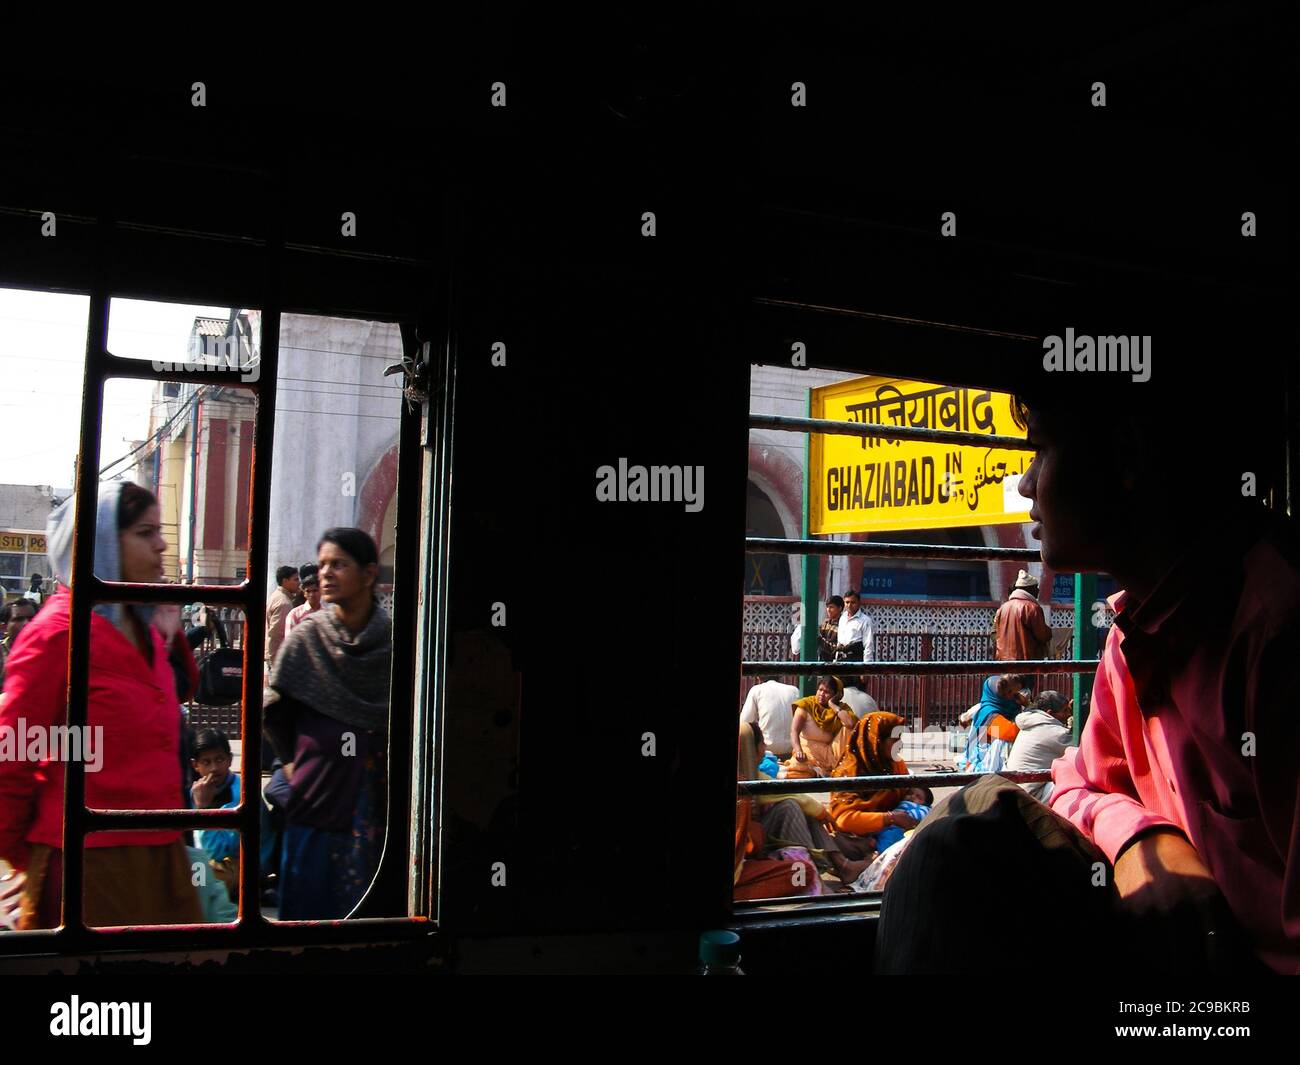 Indian train travel, photos from inside the train, passengers in train, Stock Photo